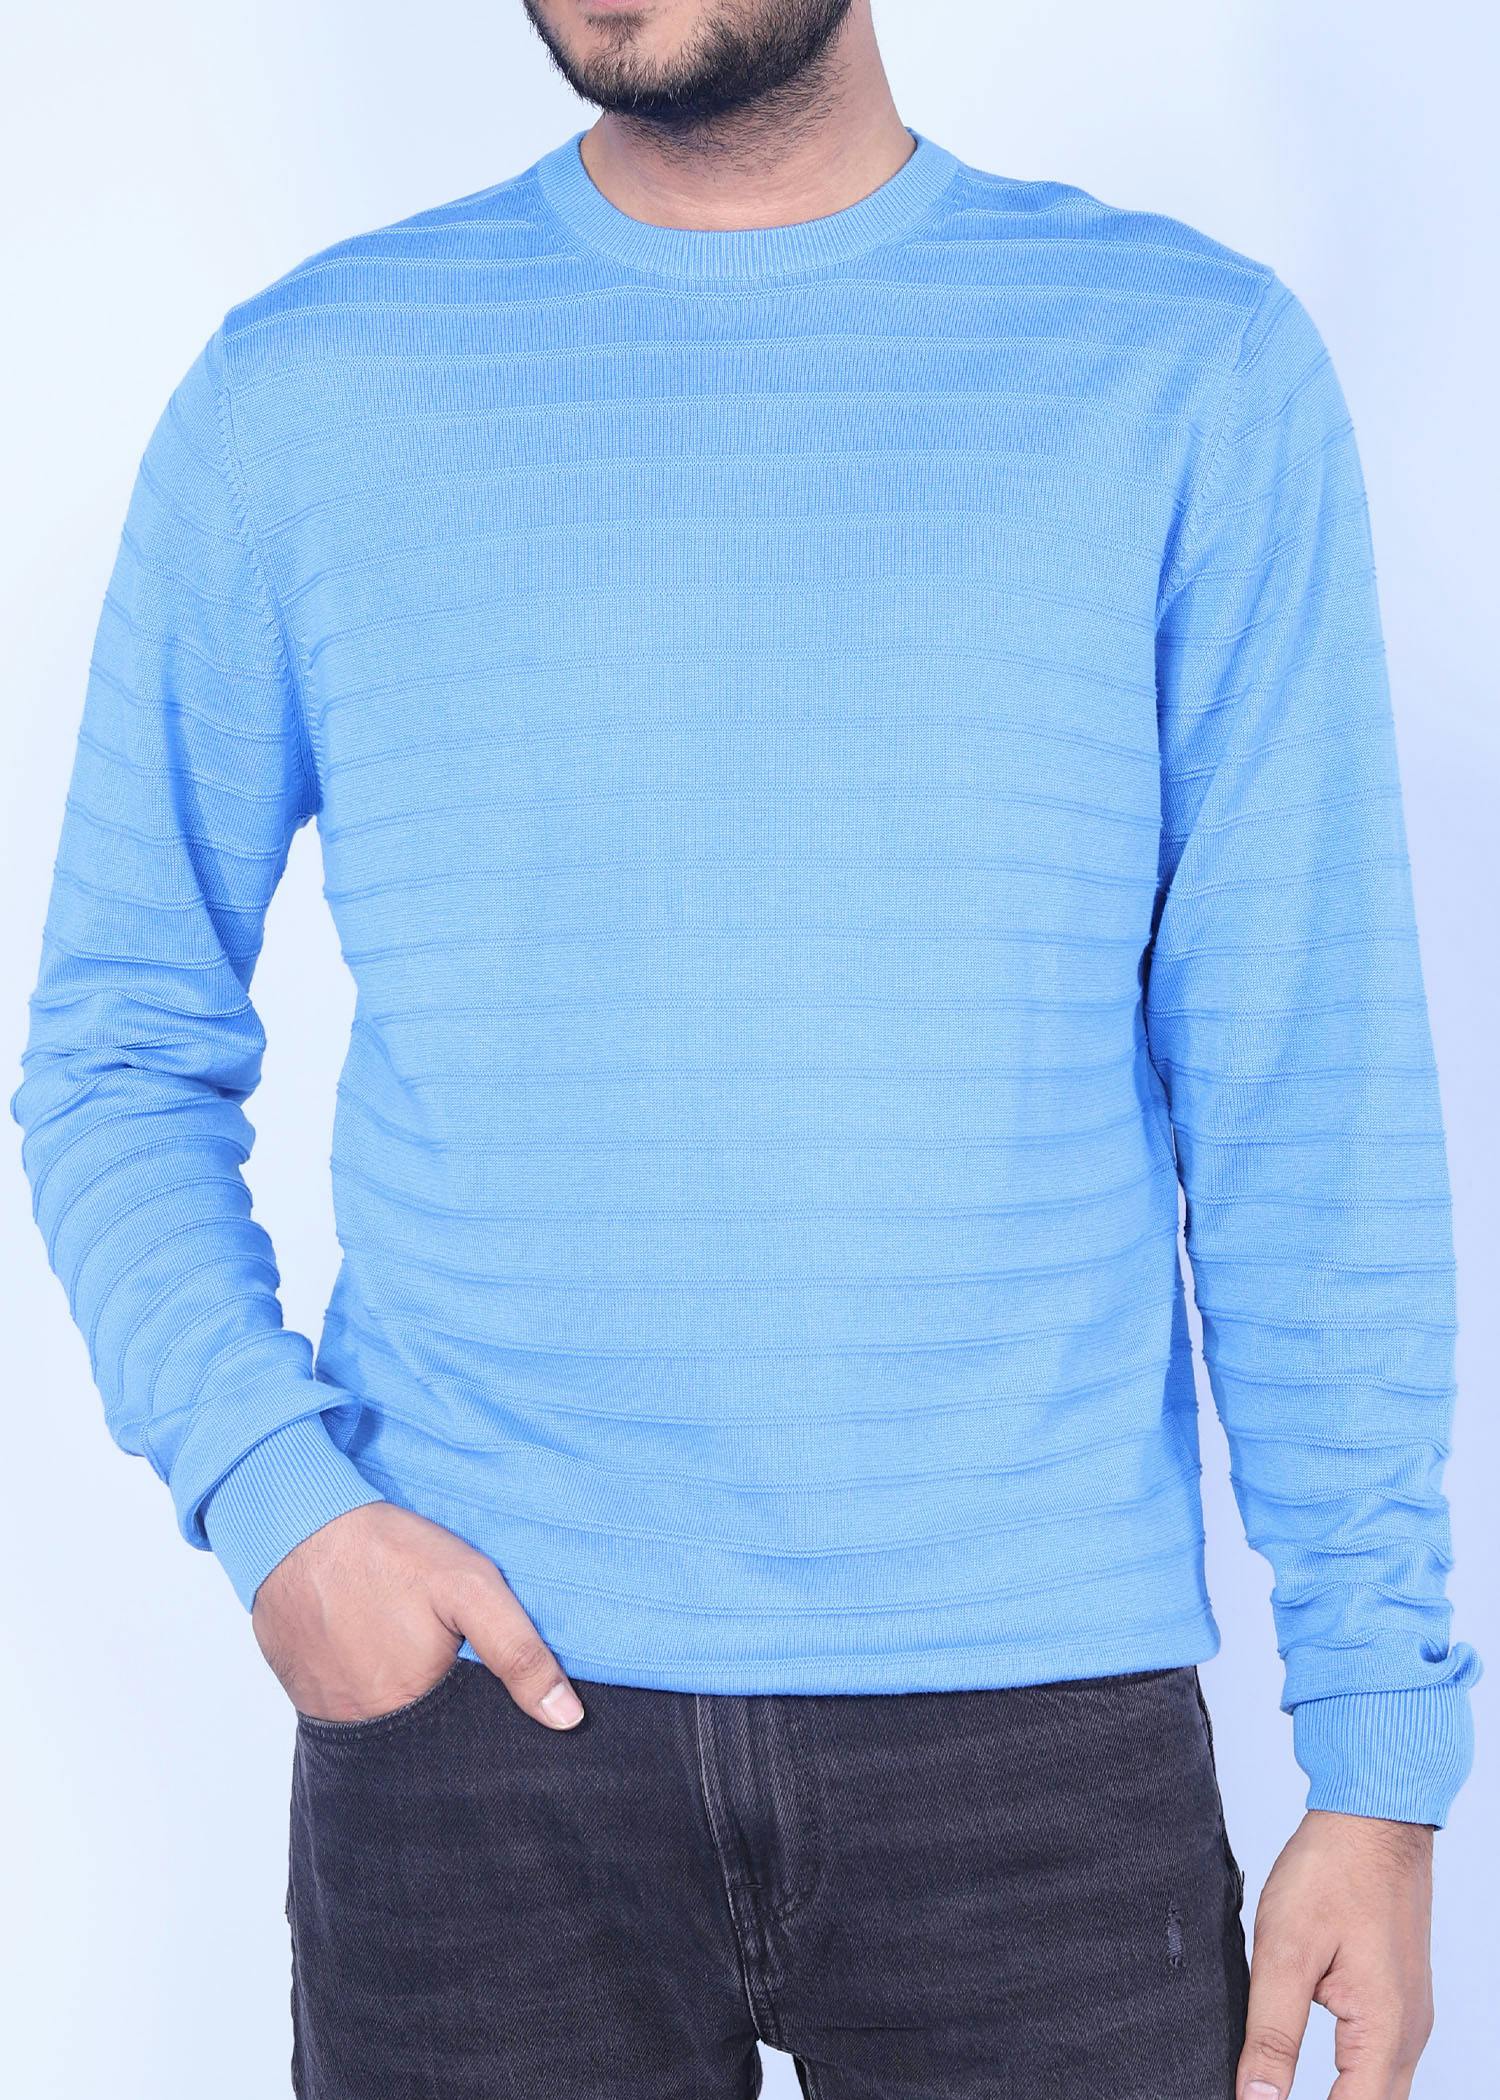 olibird sweater avion color half front view